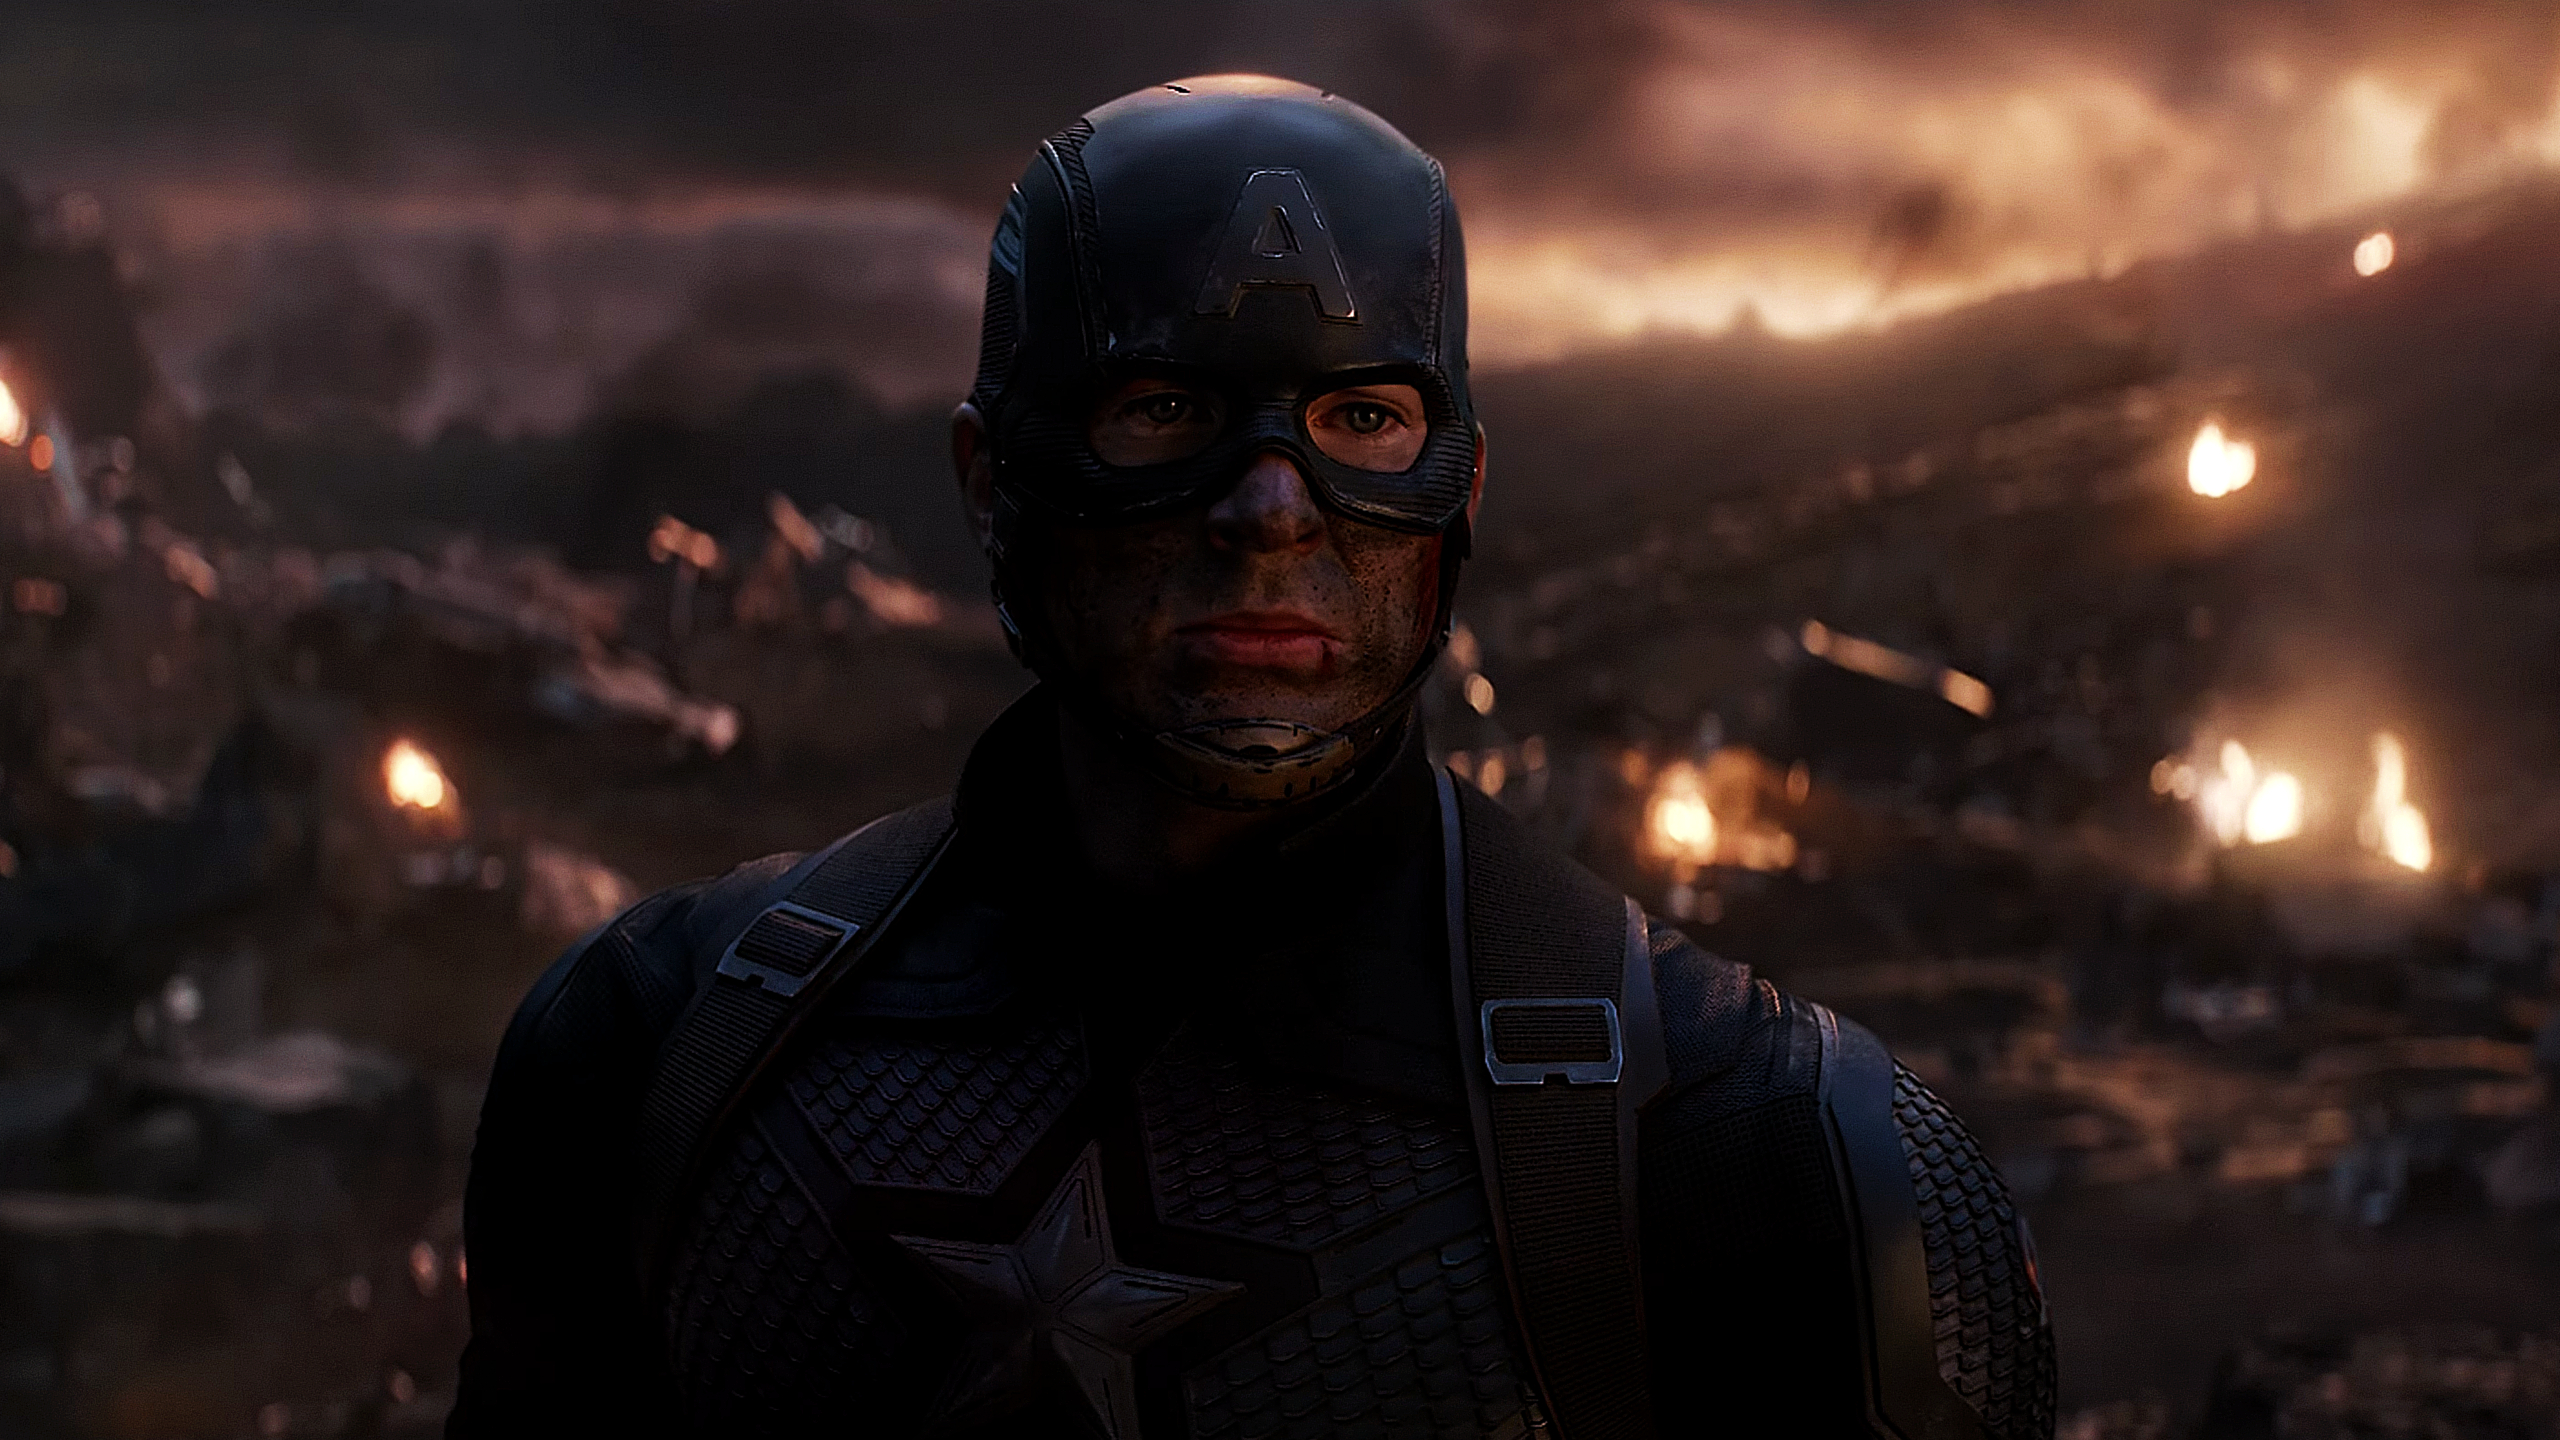 Captain America Avengers Endgame Chris Evans Mask Looking Into The Distance Marvel Cinematic Univers 2560x1440